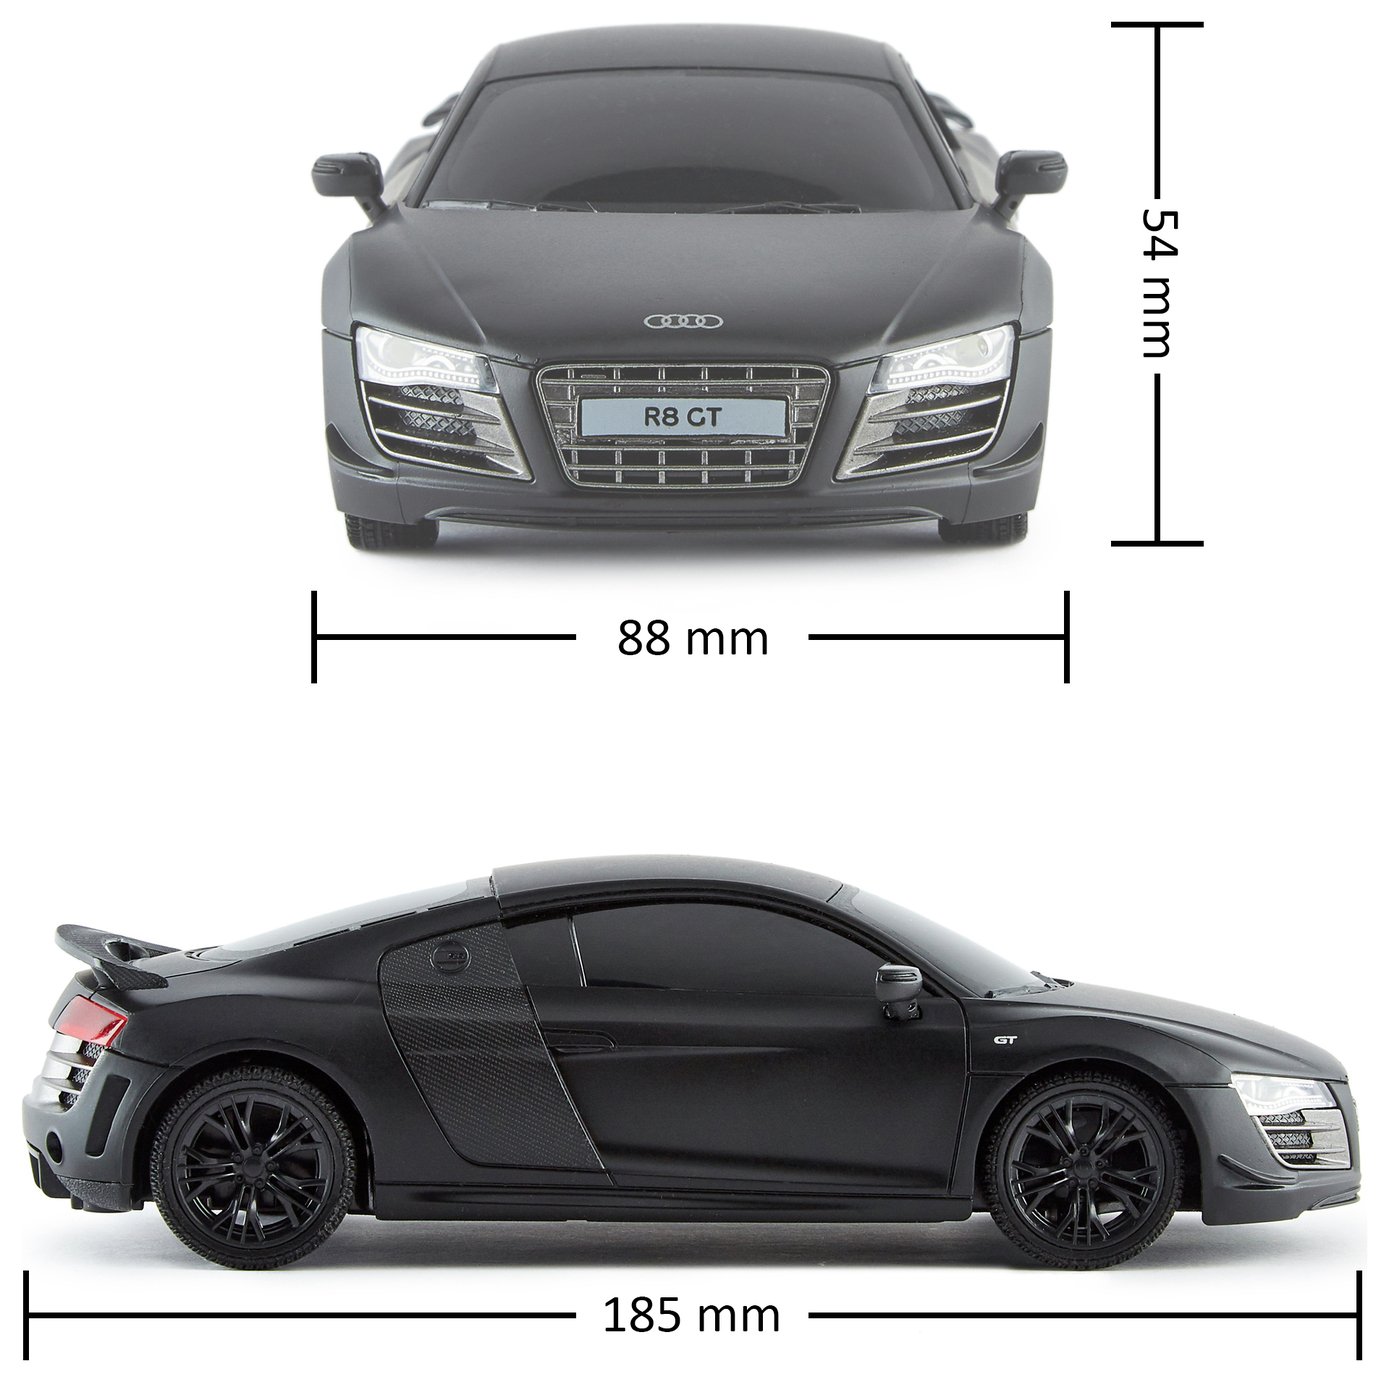 Radio Controlled Audi R8 GT Scale 1:24 Review